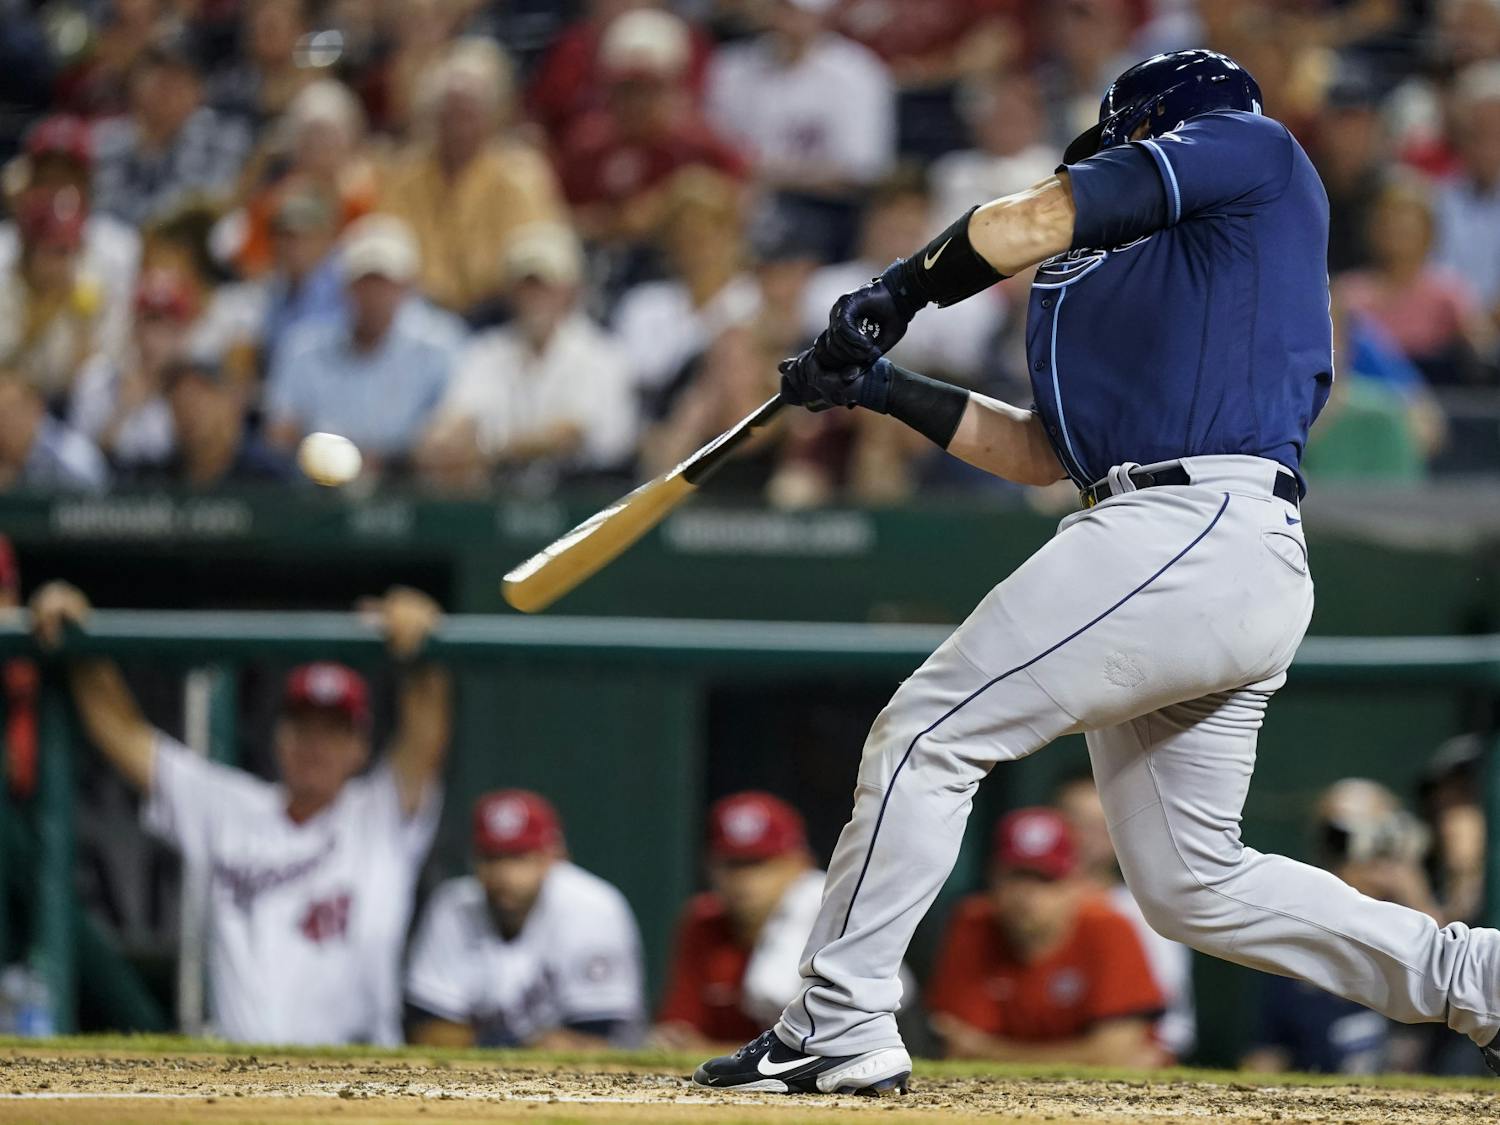 Tampa Bay Rays' Mike Zunino hits a solo home run during the ninth inning of a baseball game against the Washington Nationals at Nationals Park, Tuesday, June 29, 2021, in Washington. (AP Photo/Alex Brandon)